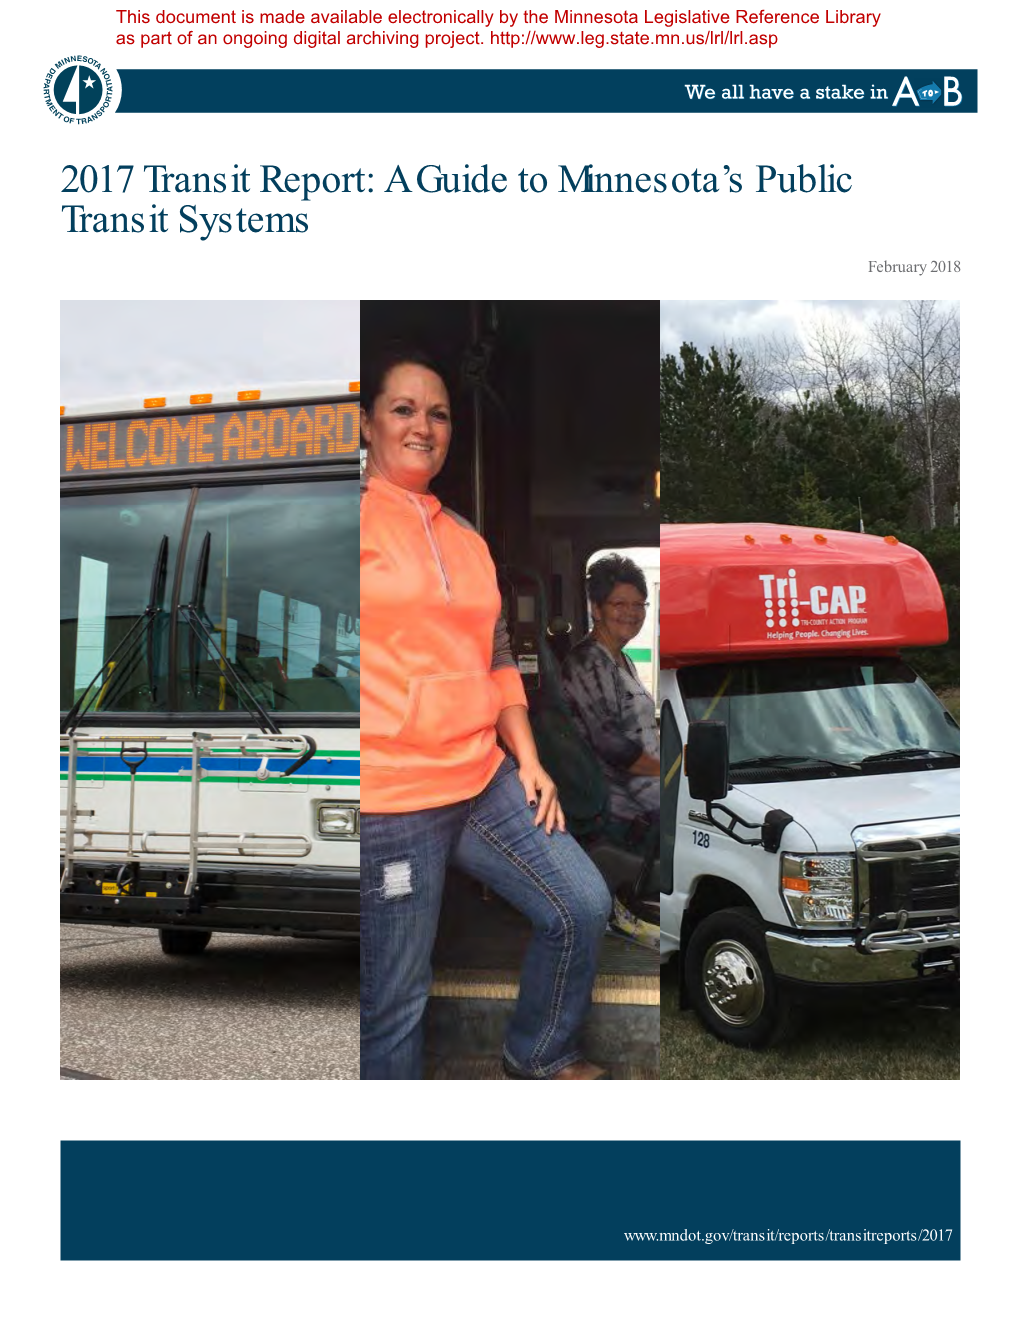 2017 Transit Report: a Guide to MN's Public Transit Systems